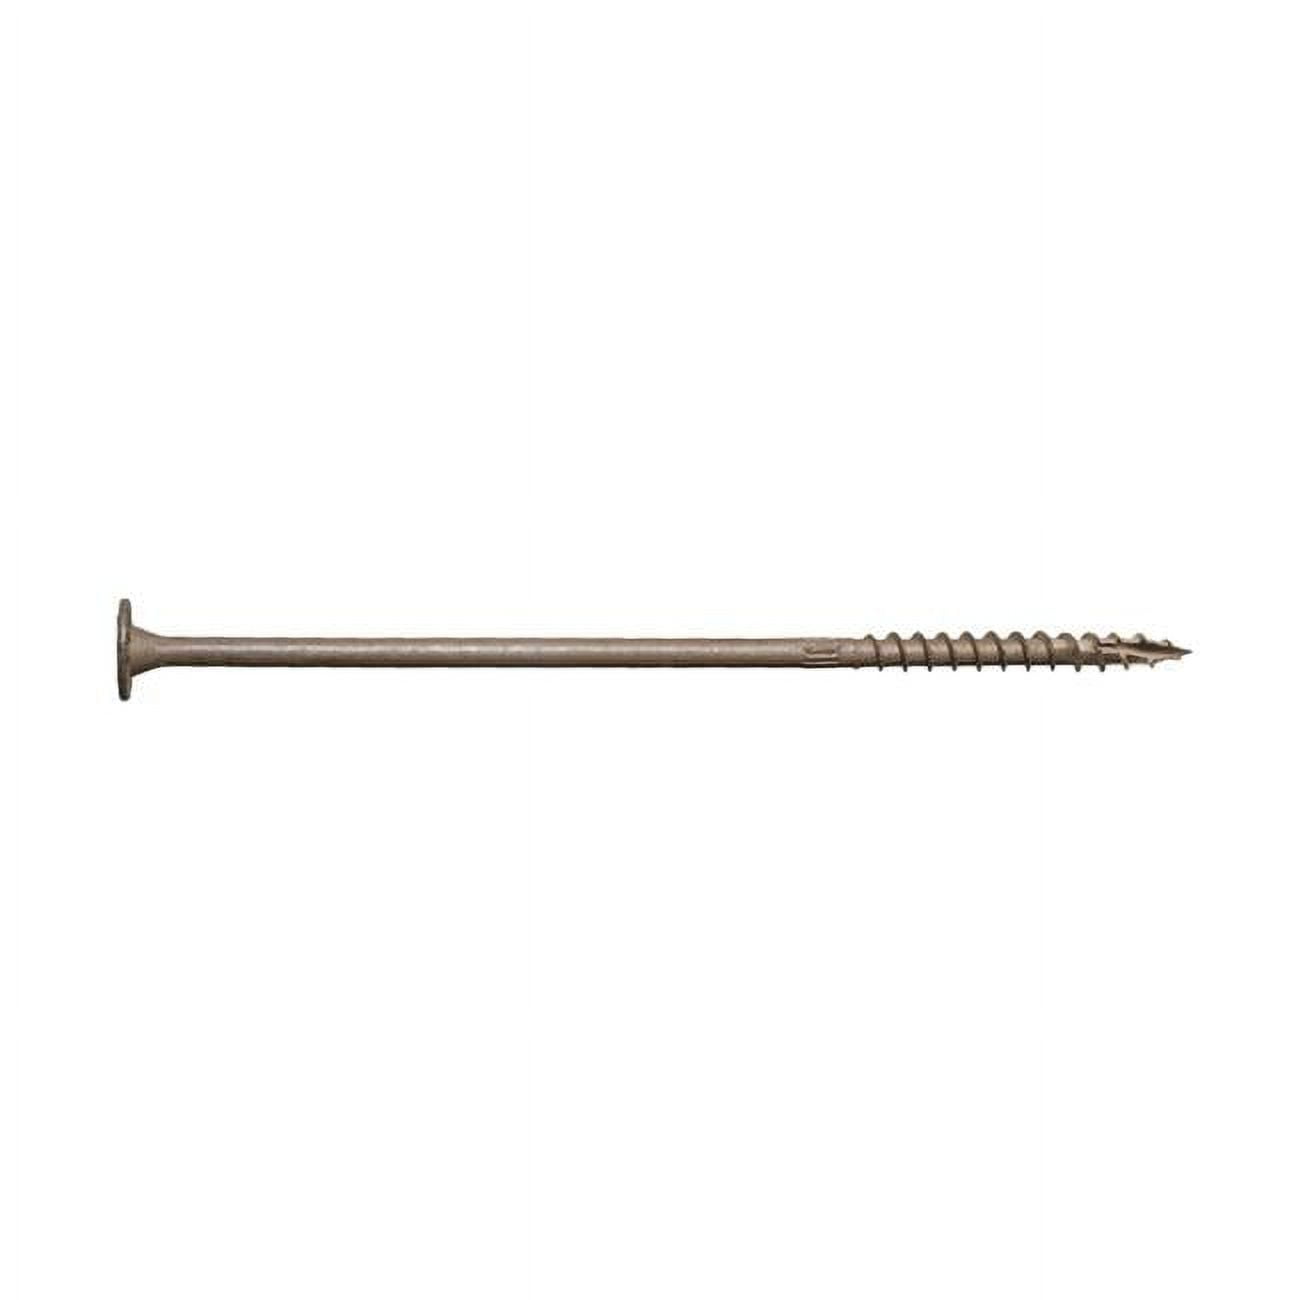 UPC 707392000105 product image for 5021105 Strong-Drive No.12 x 8 in. Star High Corrosion Resistant Wood Screws - P | upcitemdb.com